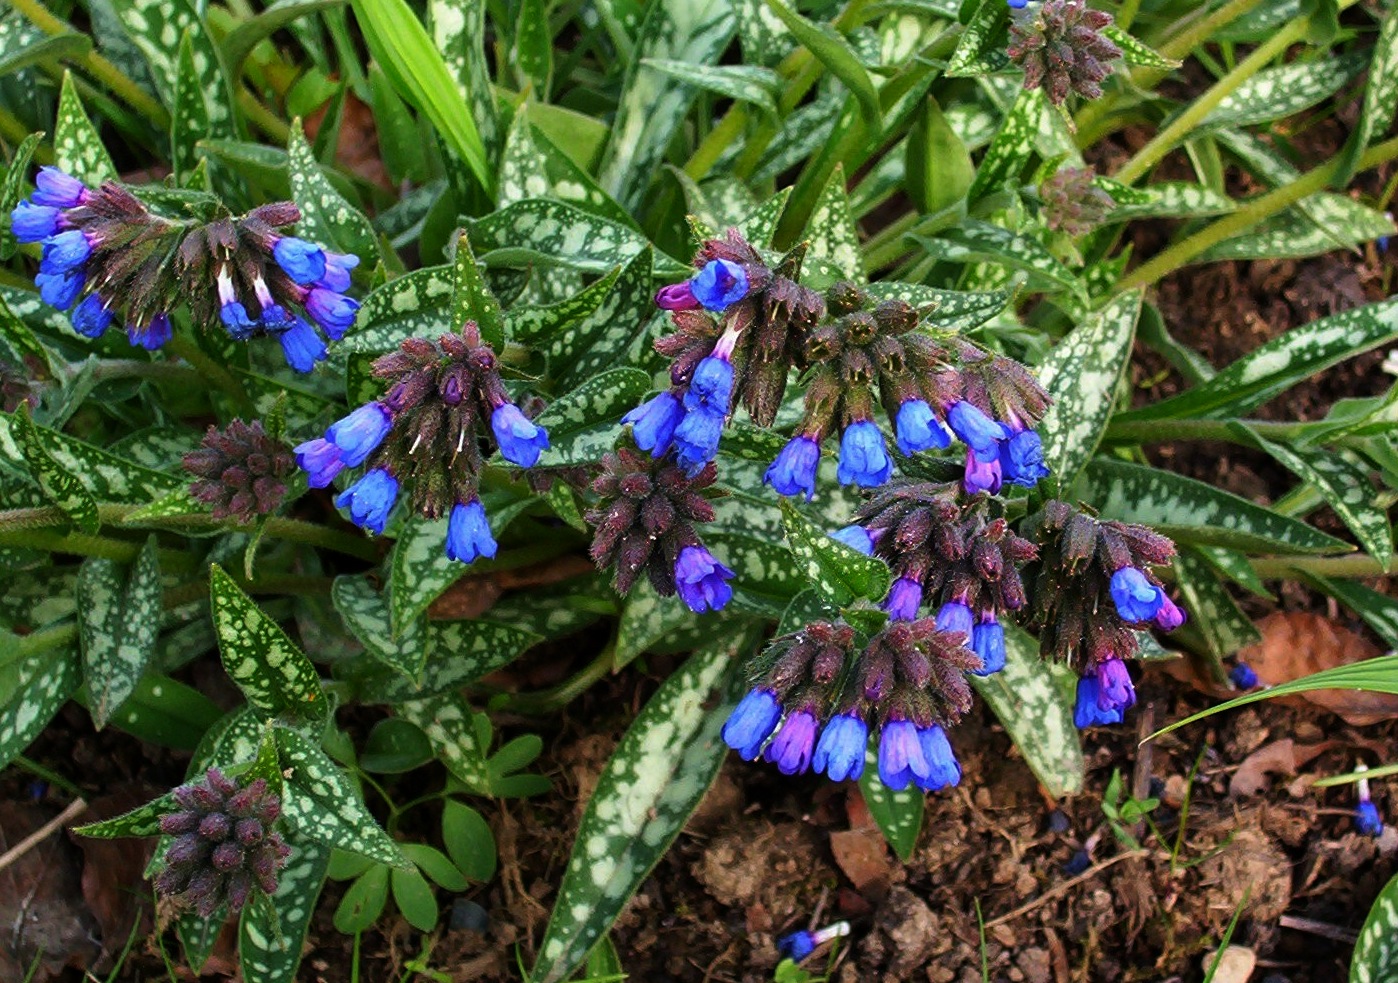 blue flowers with purple-burgundy sepals and buds, cream-green leaves and green stems